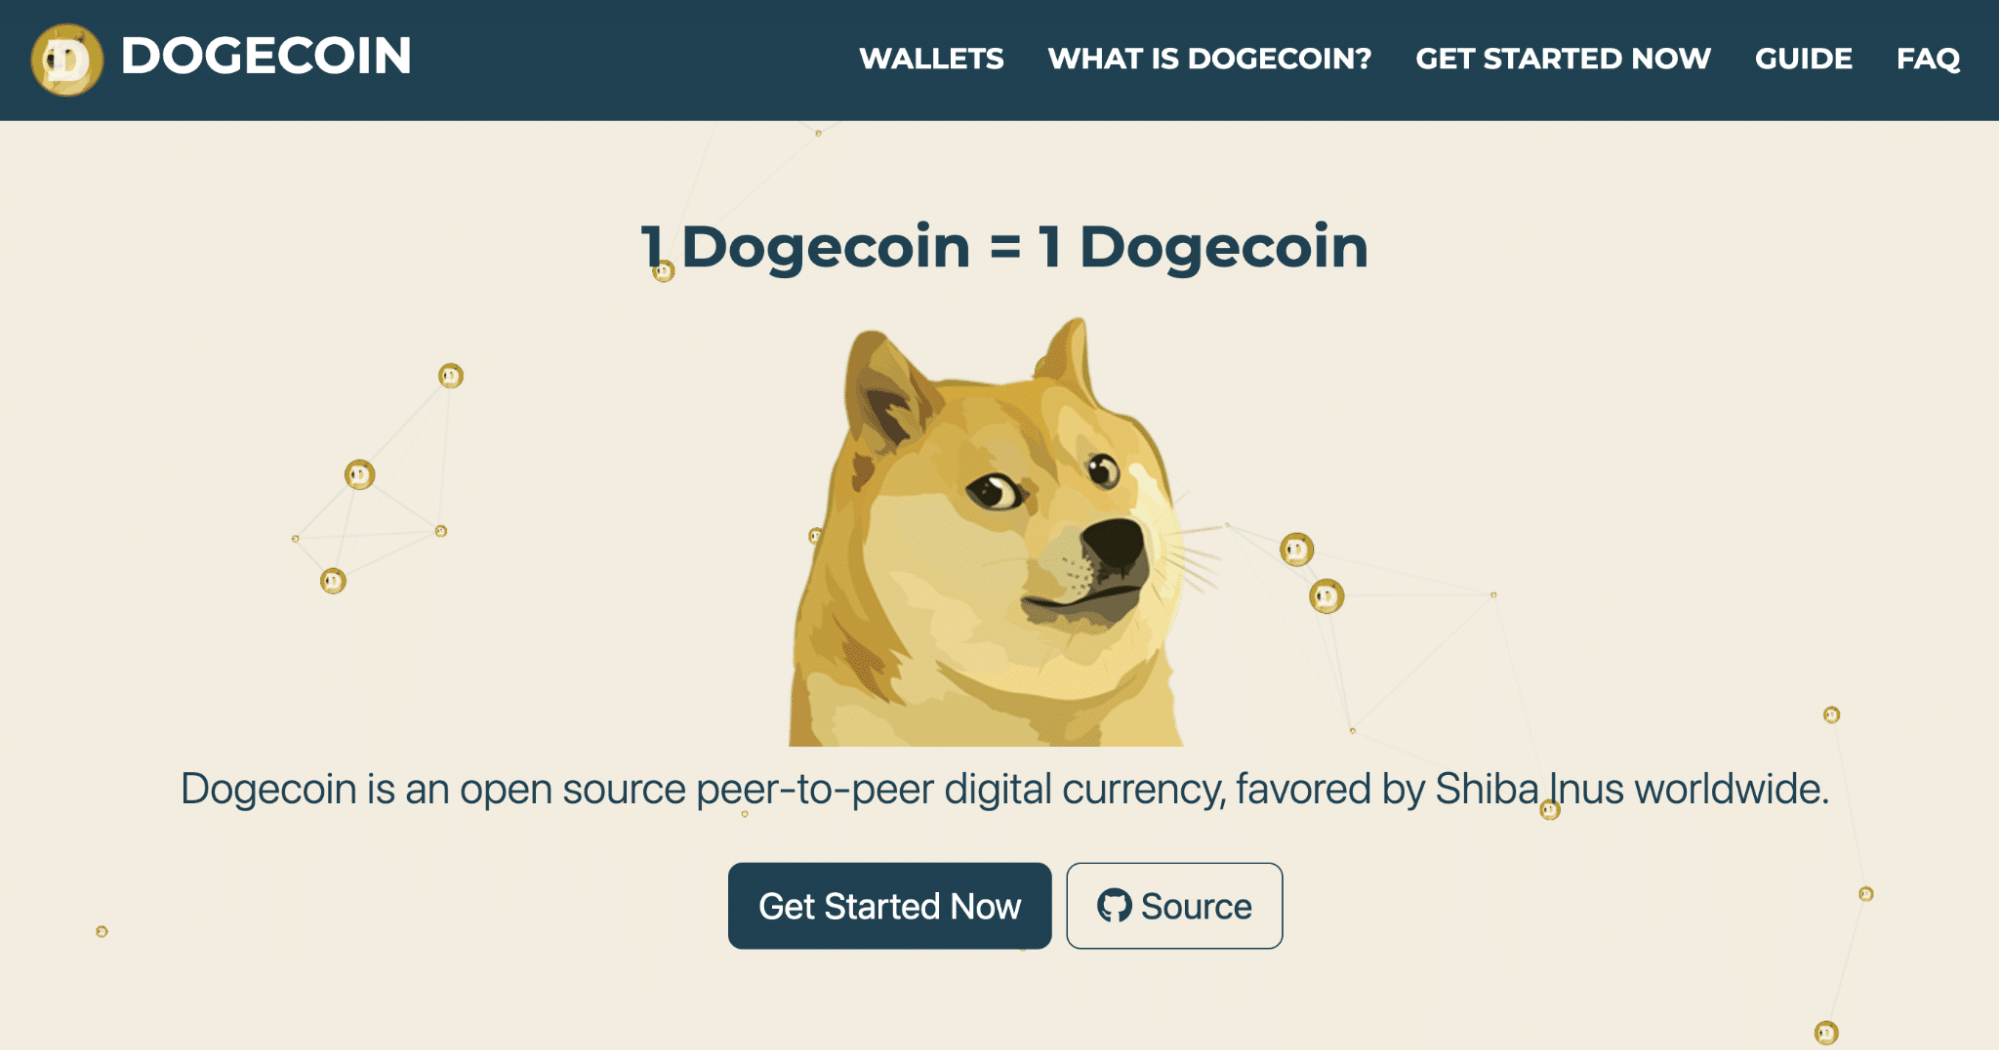 Dogecoin’s homepage